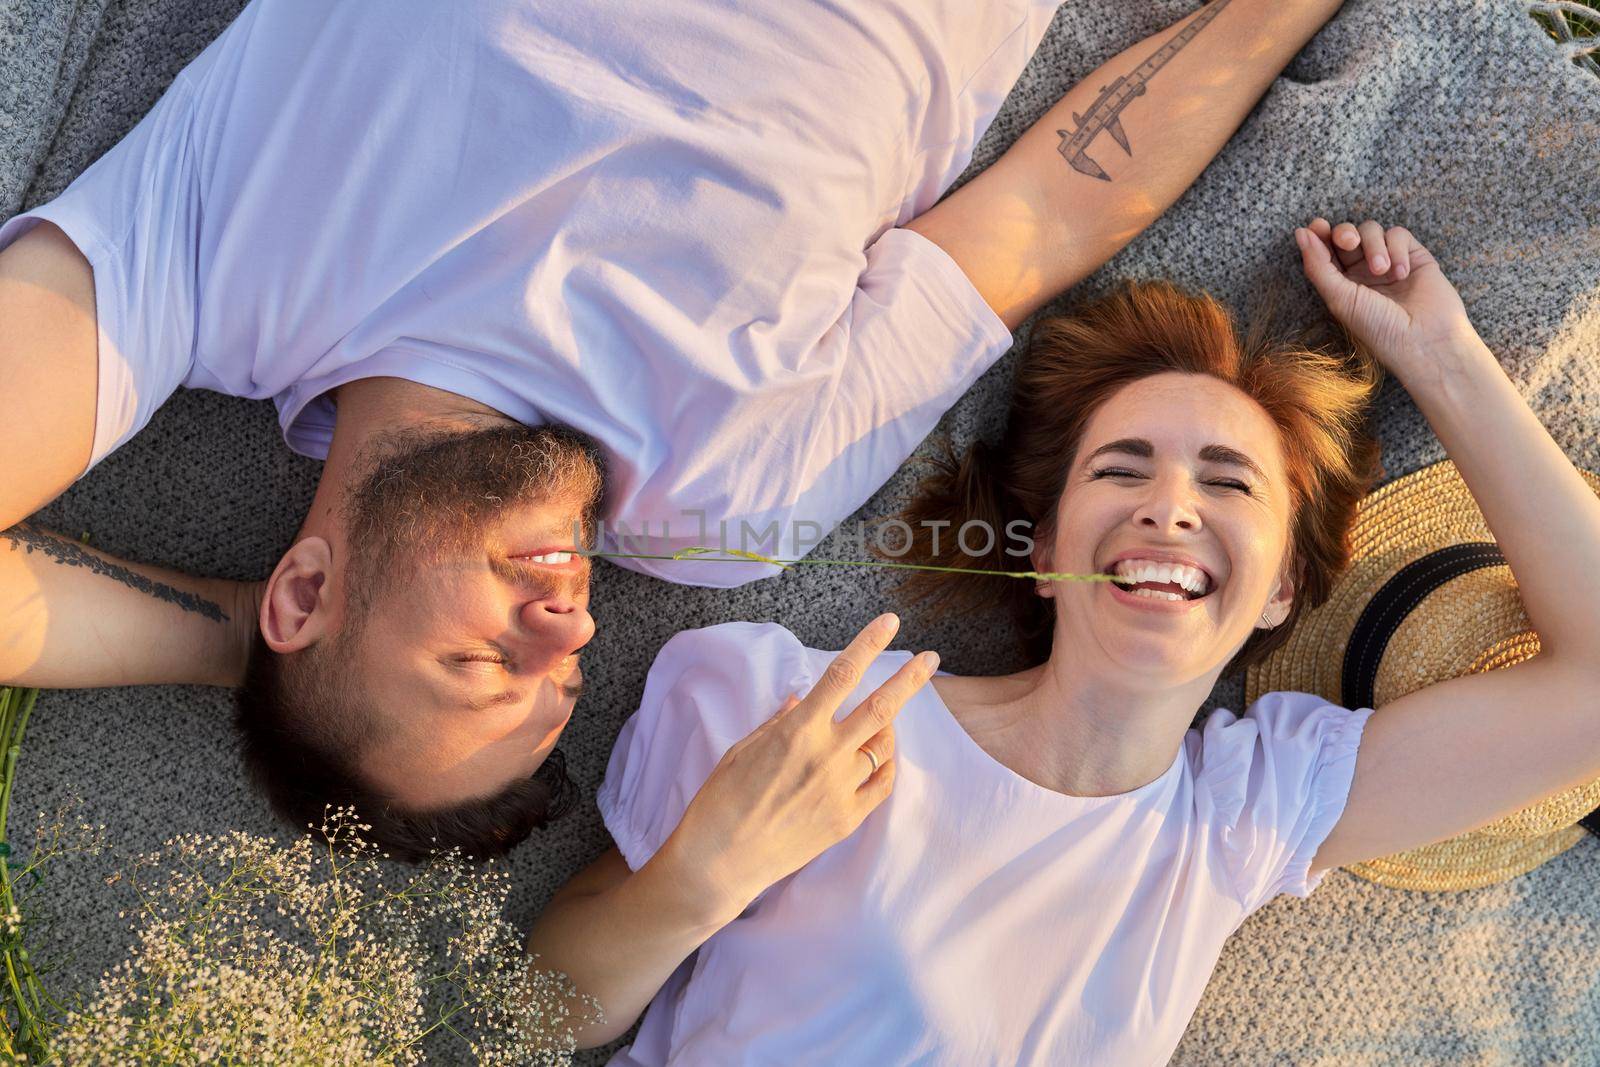 Happy romantic middle aged couple, top view on smiling faces lying on blanket, in sunny sunset light. Love, relationships, dating, family, lifestyle, people 30s 40s age concept